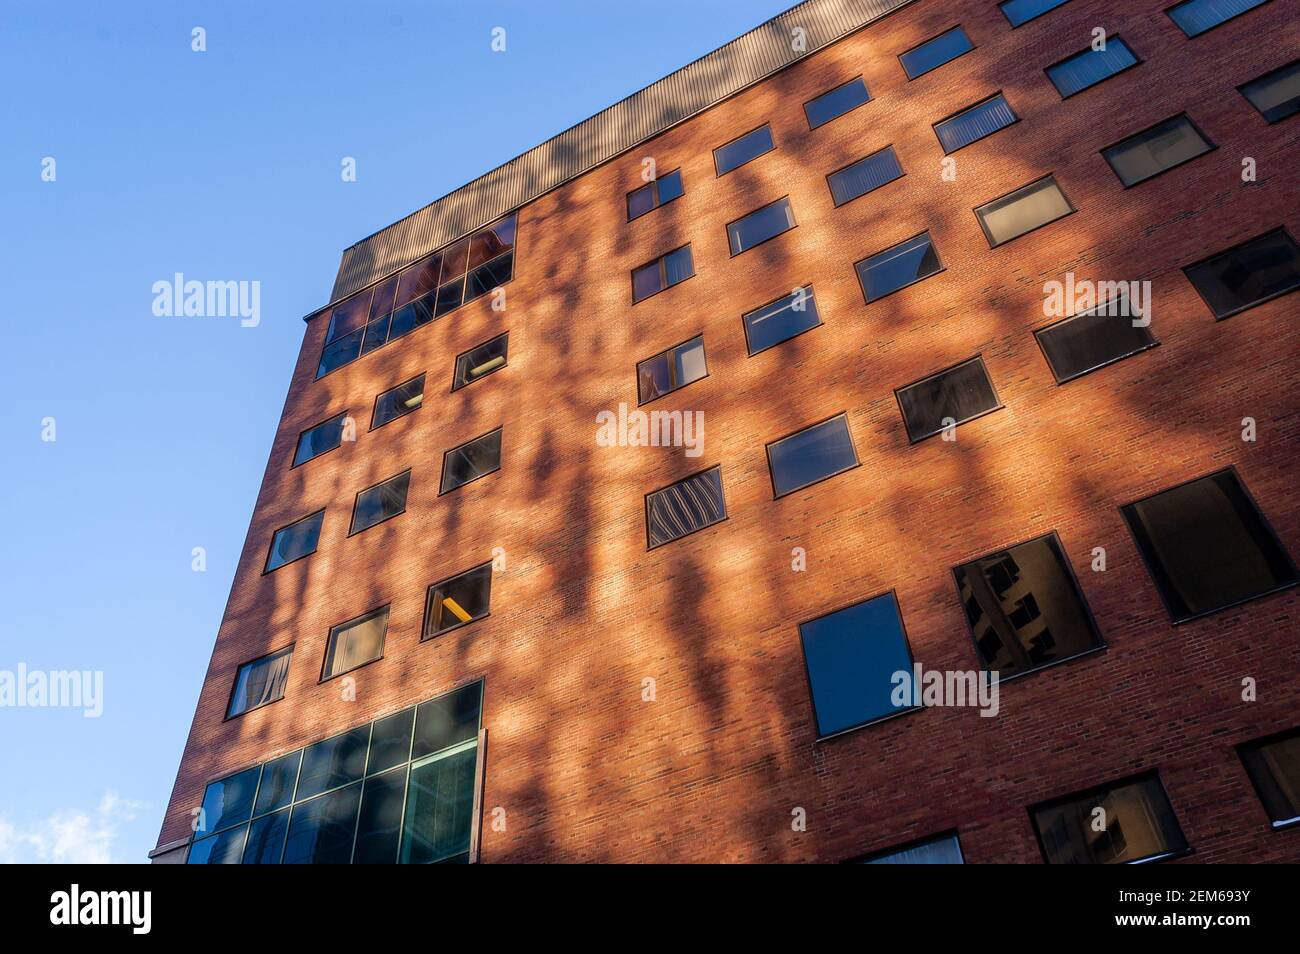 Architectural Details of building facade with interesting light. Stock Photo